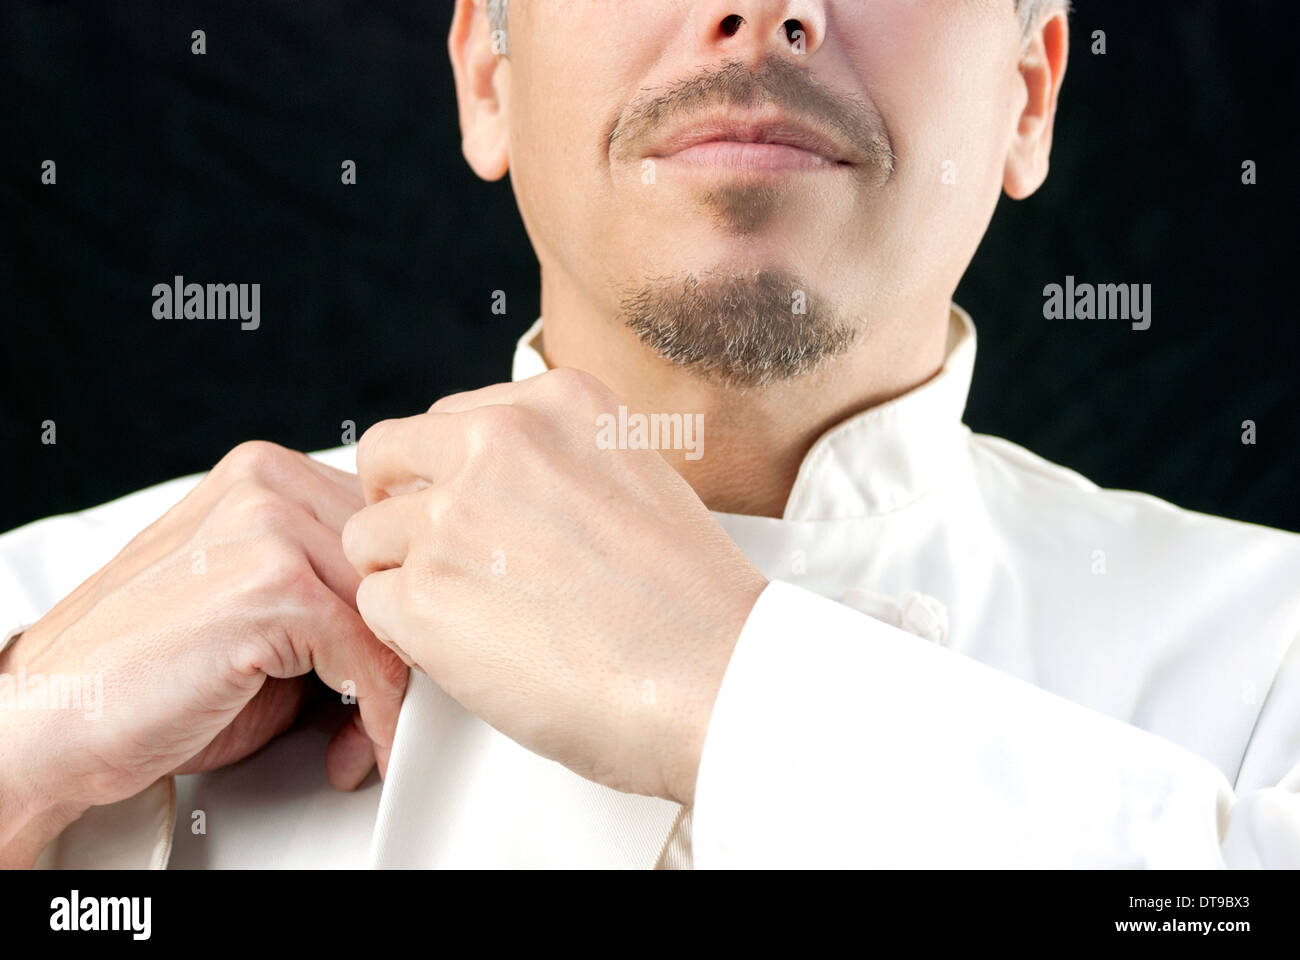 Close-up of a chef doing up his jacket. Stock Photo